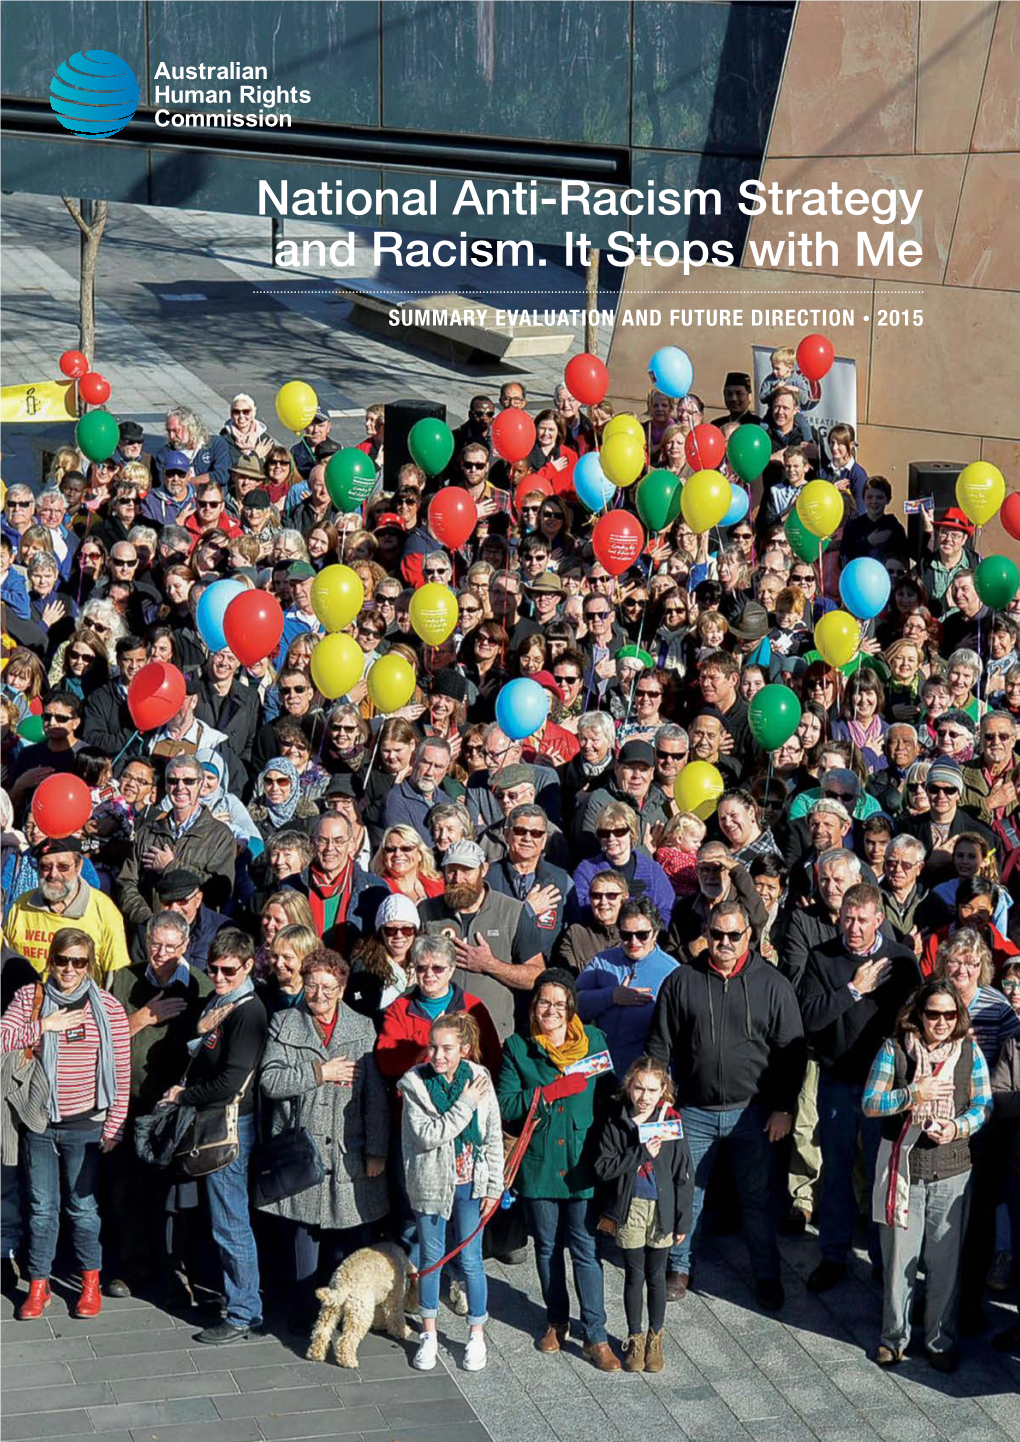 National Anti-Racism Strategy and Racism. It Stops with Me